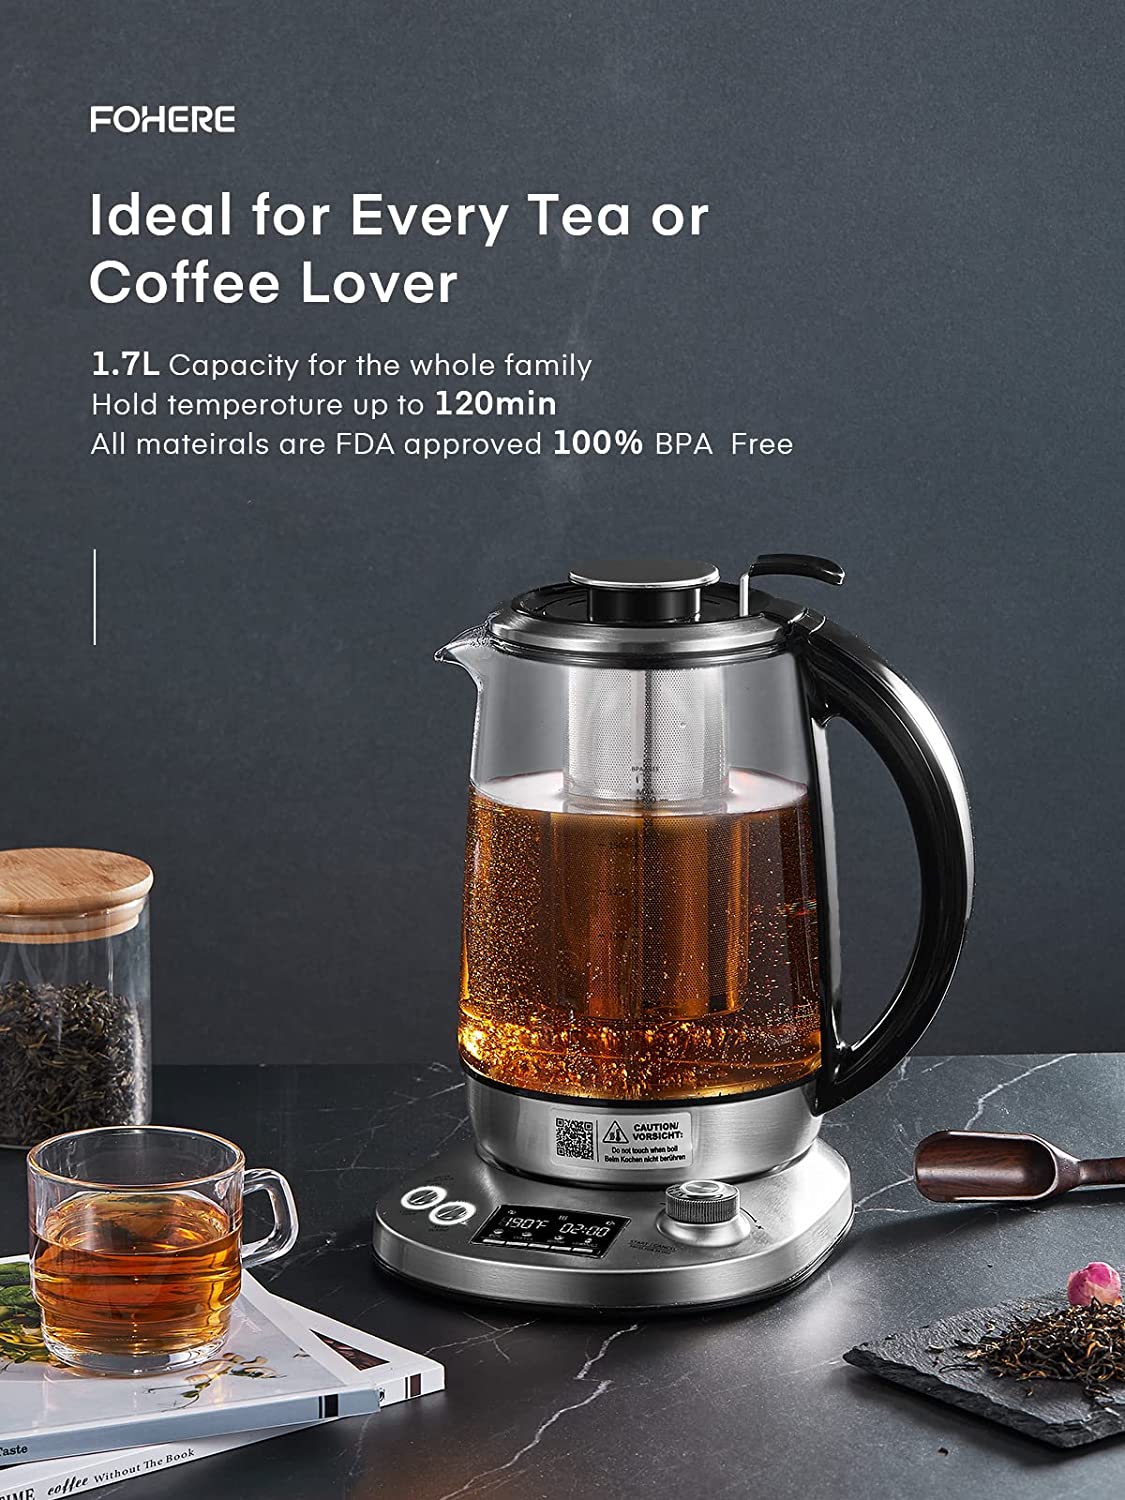 idea for every tea or coffee lover, Electric Kettle, FOHERE Electric Tea Kettle with 9 Presets, 1.7 Liter Tea Maker with Removable Infuser, 140℉ to 212℉ Precise Temperature Control, 1200W, Borosilicate Glass | Stainless Steel